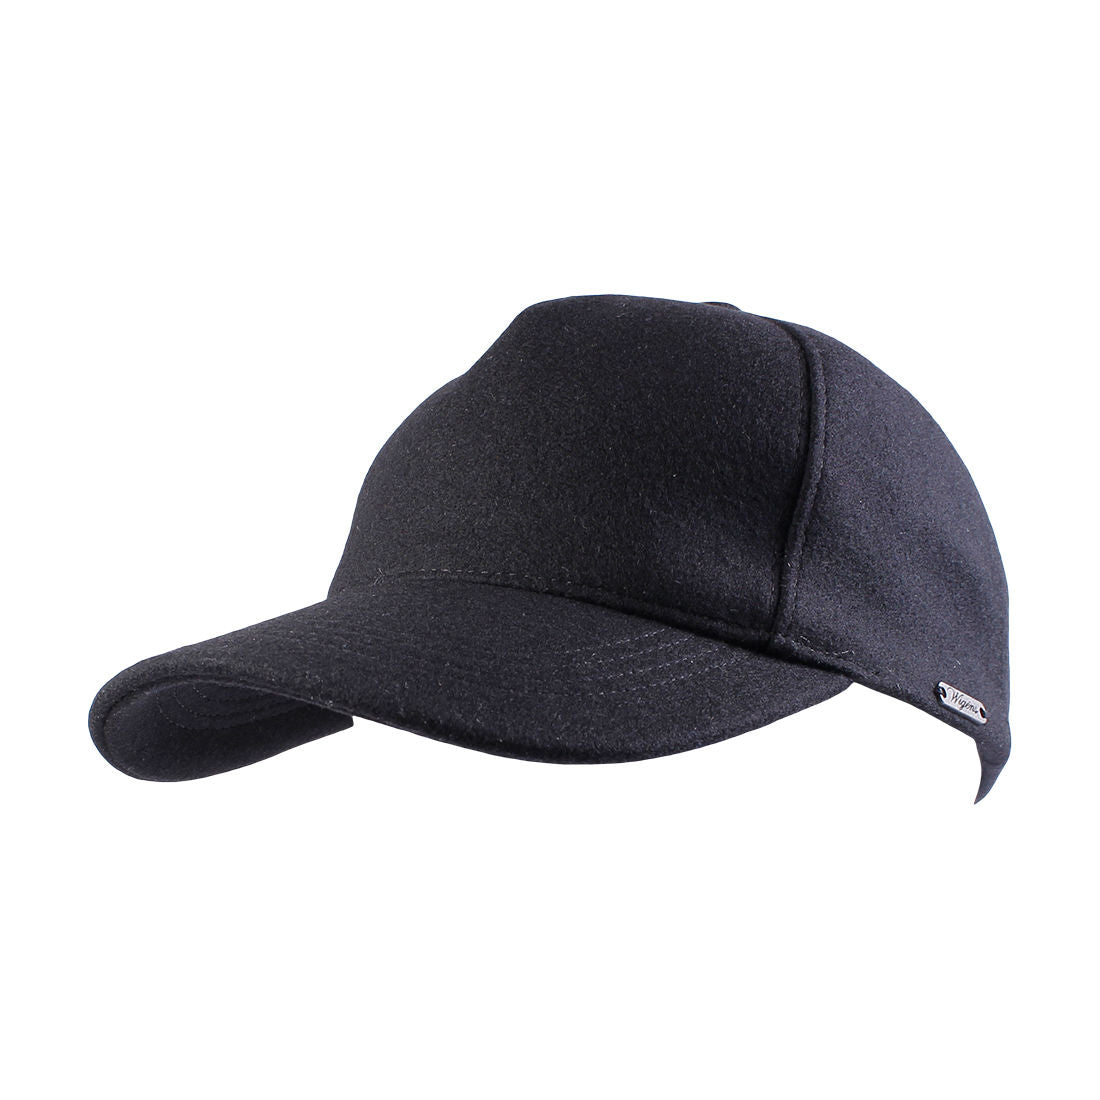 Melton Wool Adjustable Baseball Contemporary Cap (Choice of Colors) by Wigens